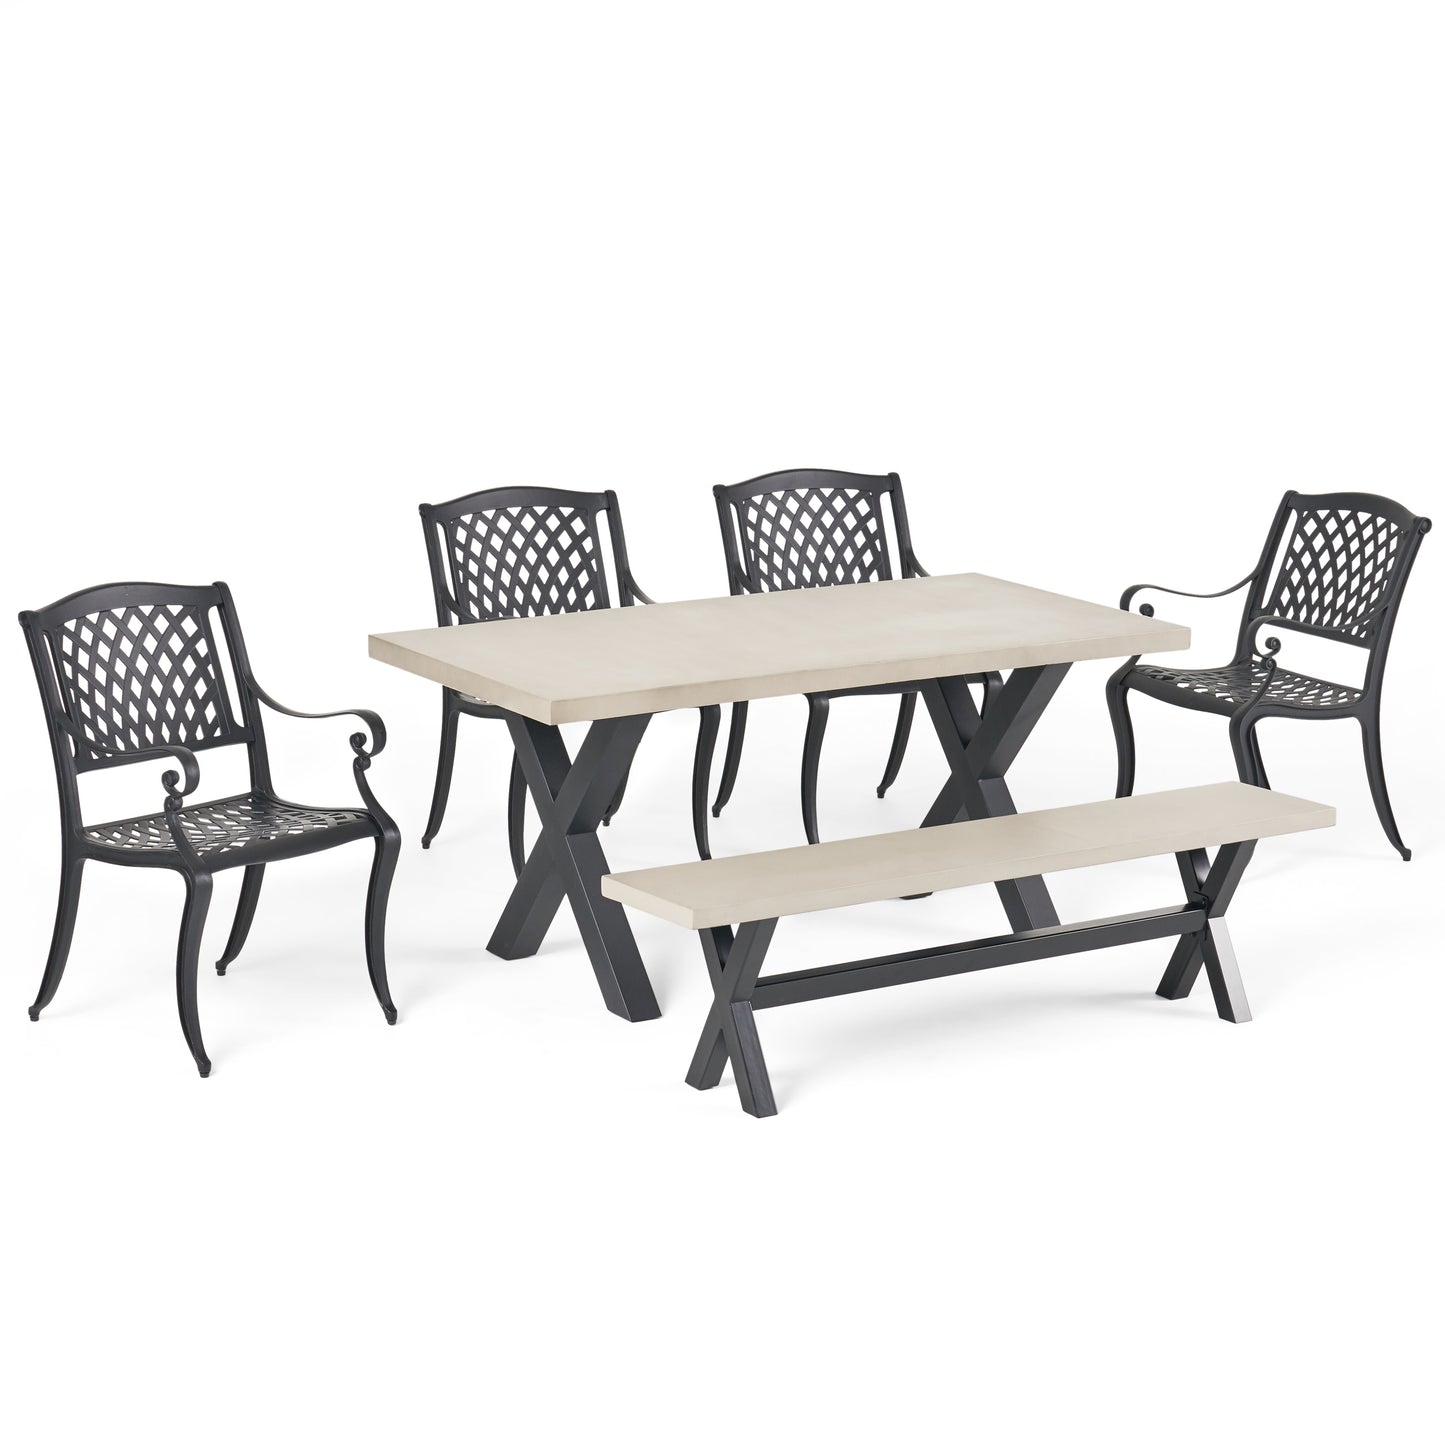 Leala Outdoor 6 Seater Dining Set With Bench